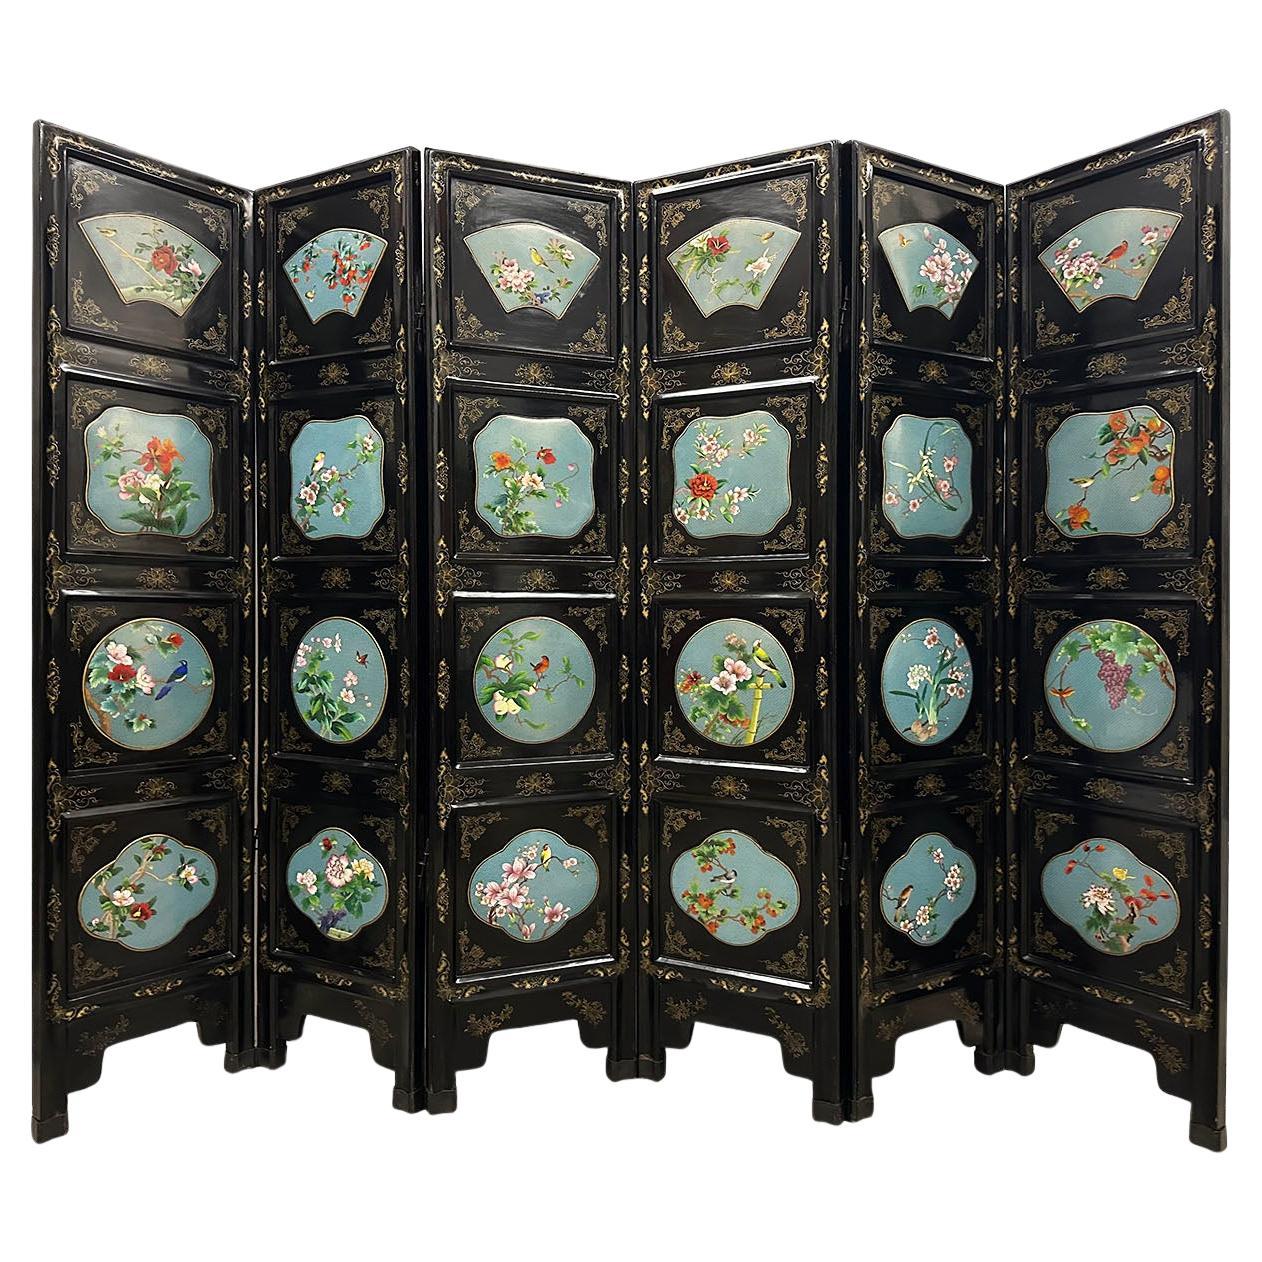 Early 20th Century Chinese Folding Screen/Room Divider with Cloisonne panels